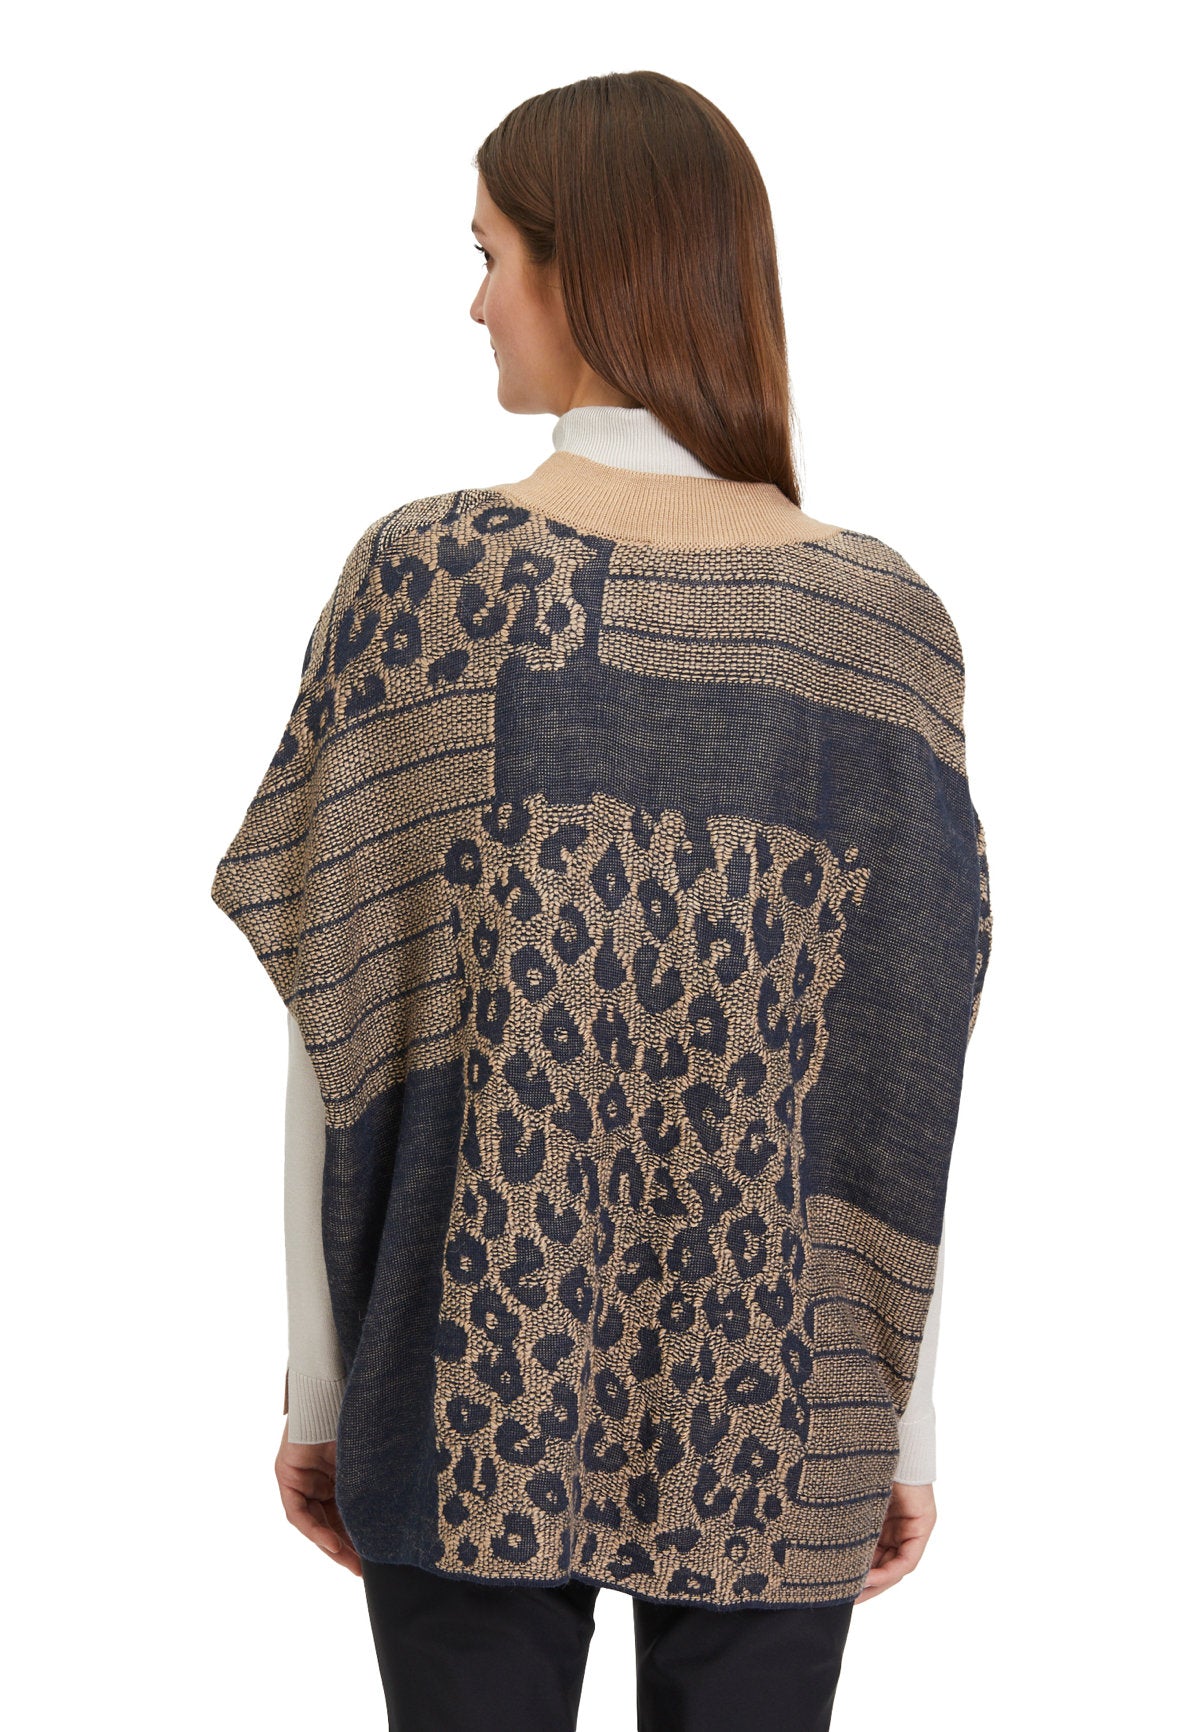 Printed Poncho With Deep V-Neck_5968-2222_7982_04